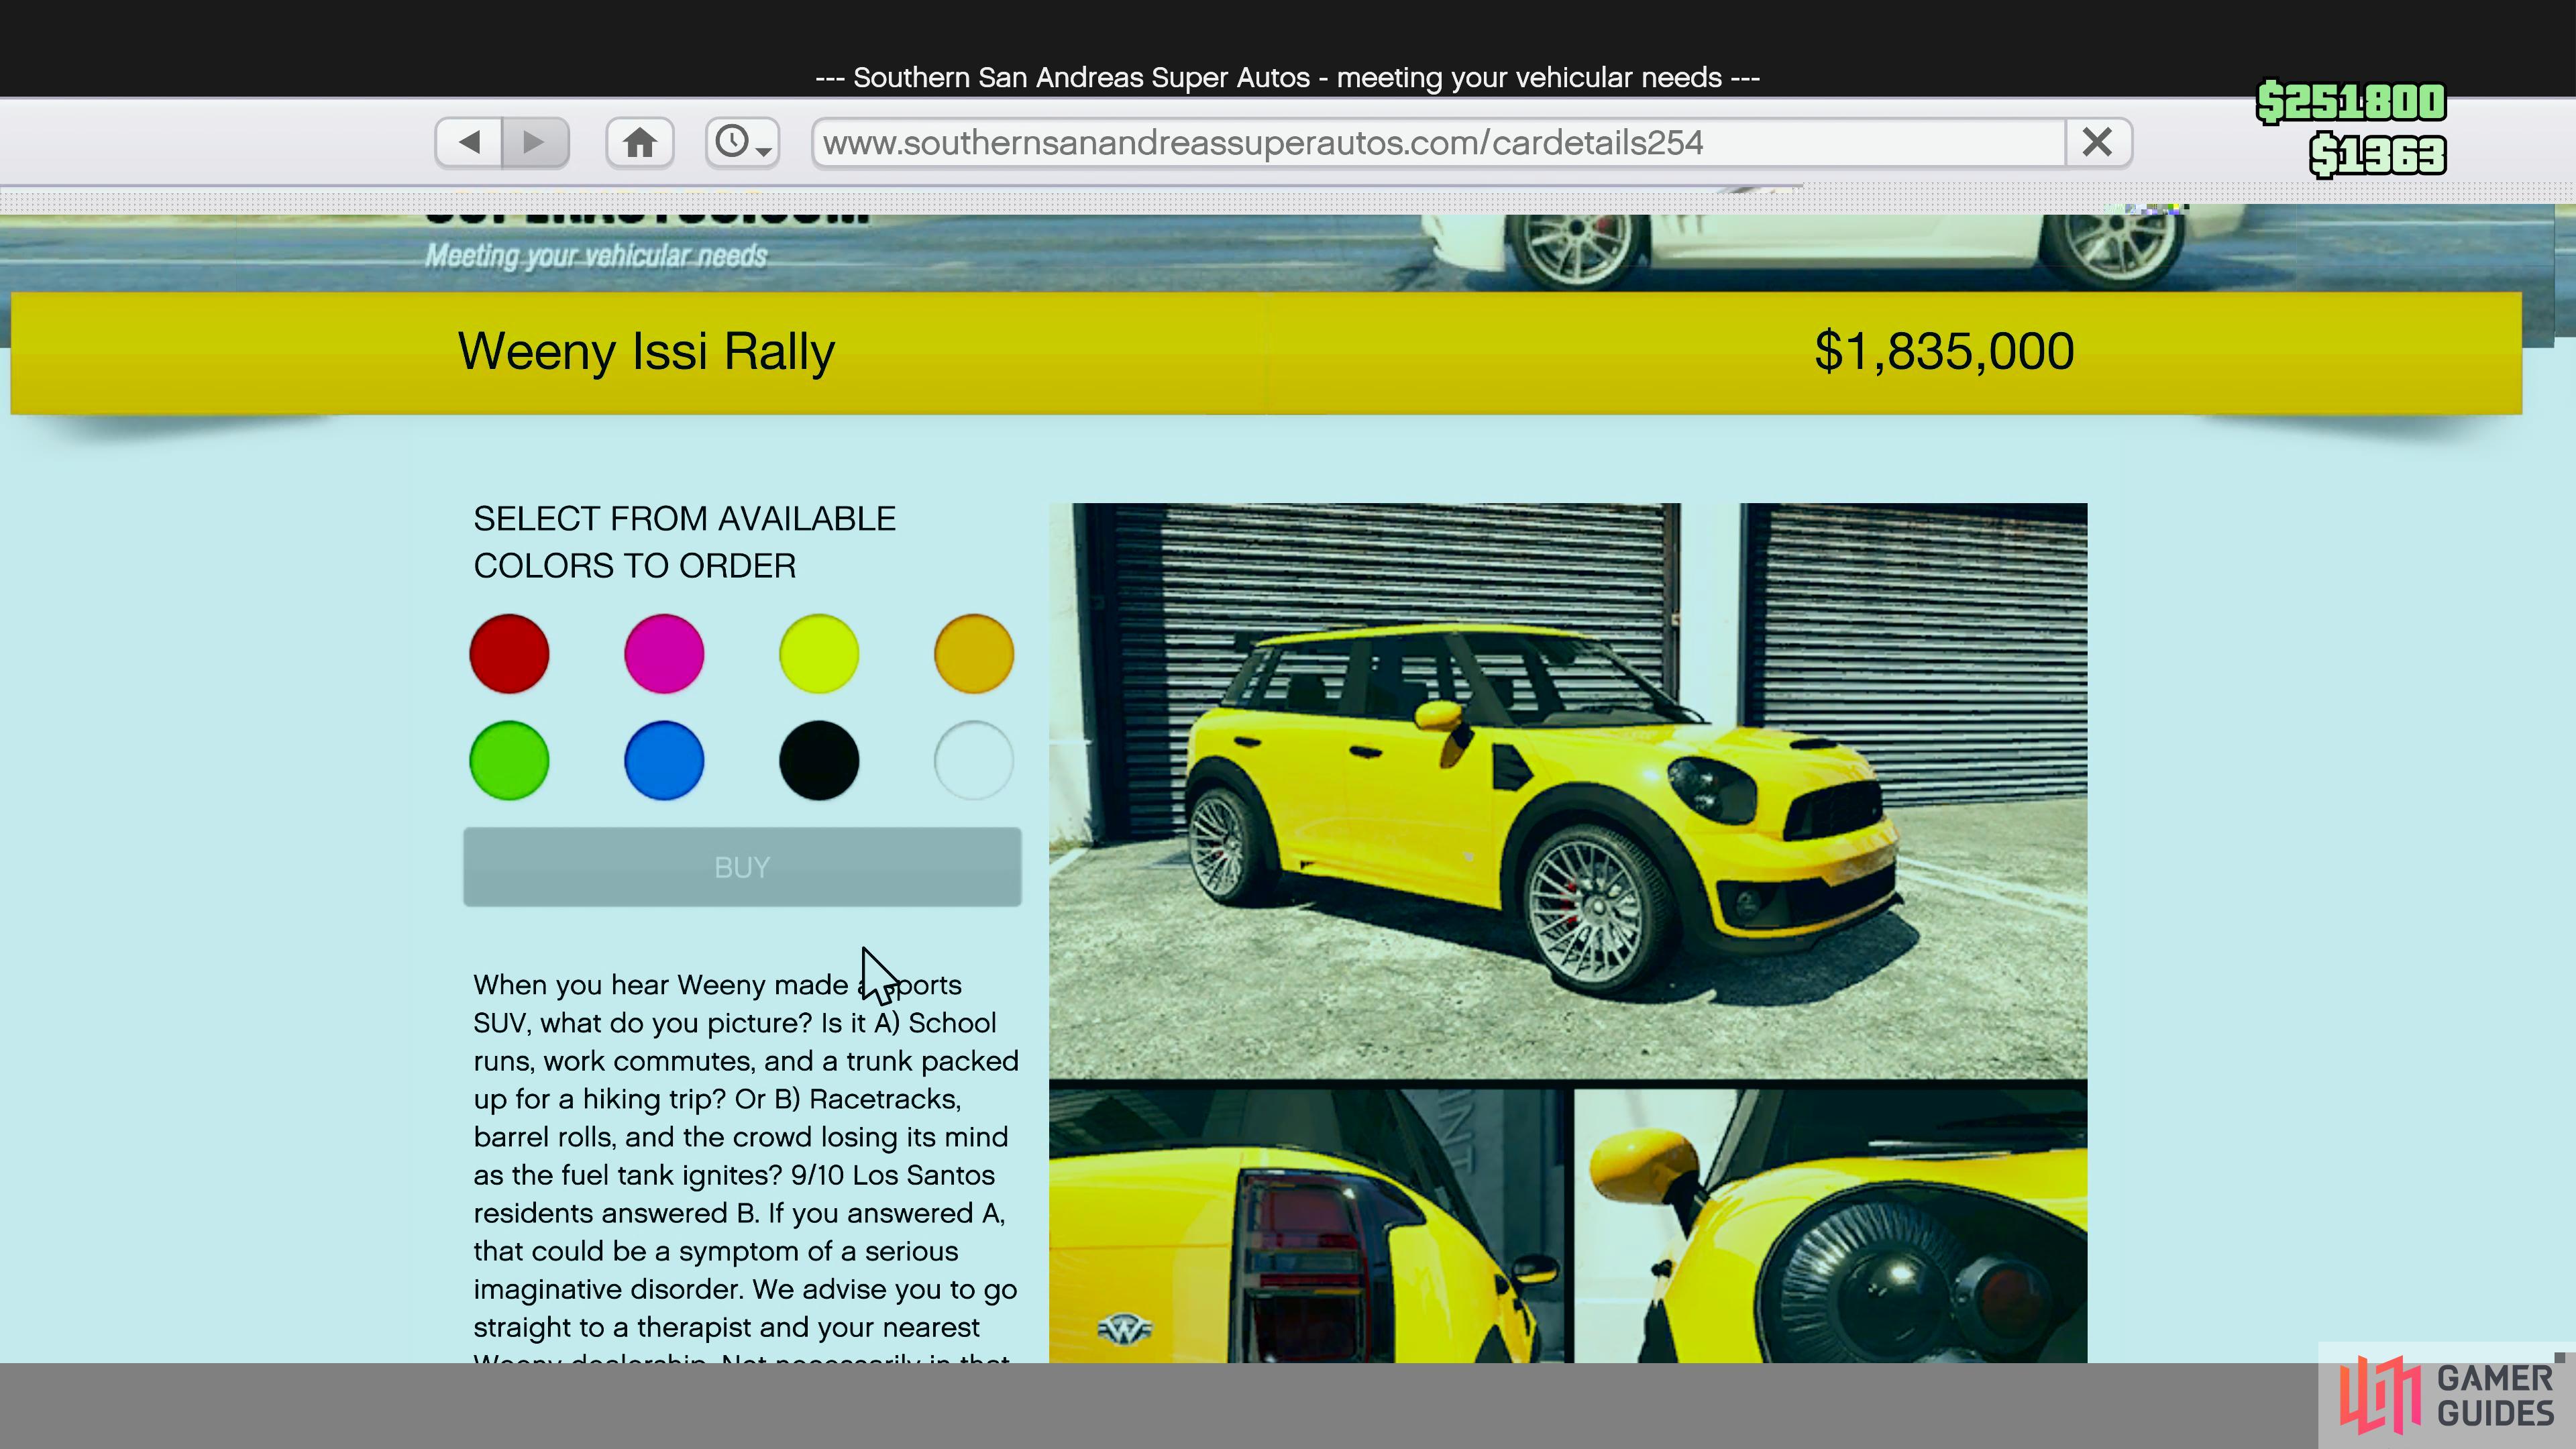 You can purchase the Weeny Issi Rally from the Southern San Andreas Super Auto.